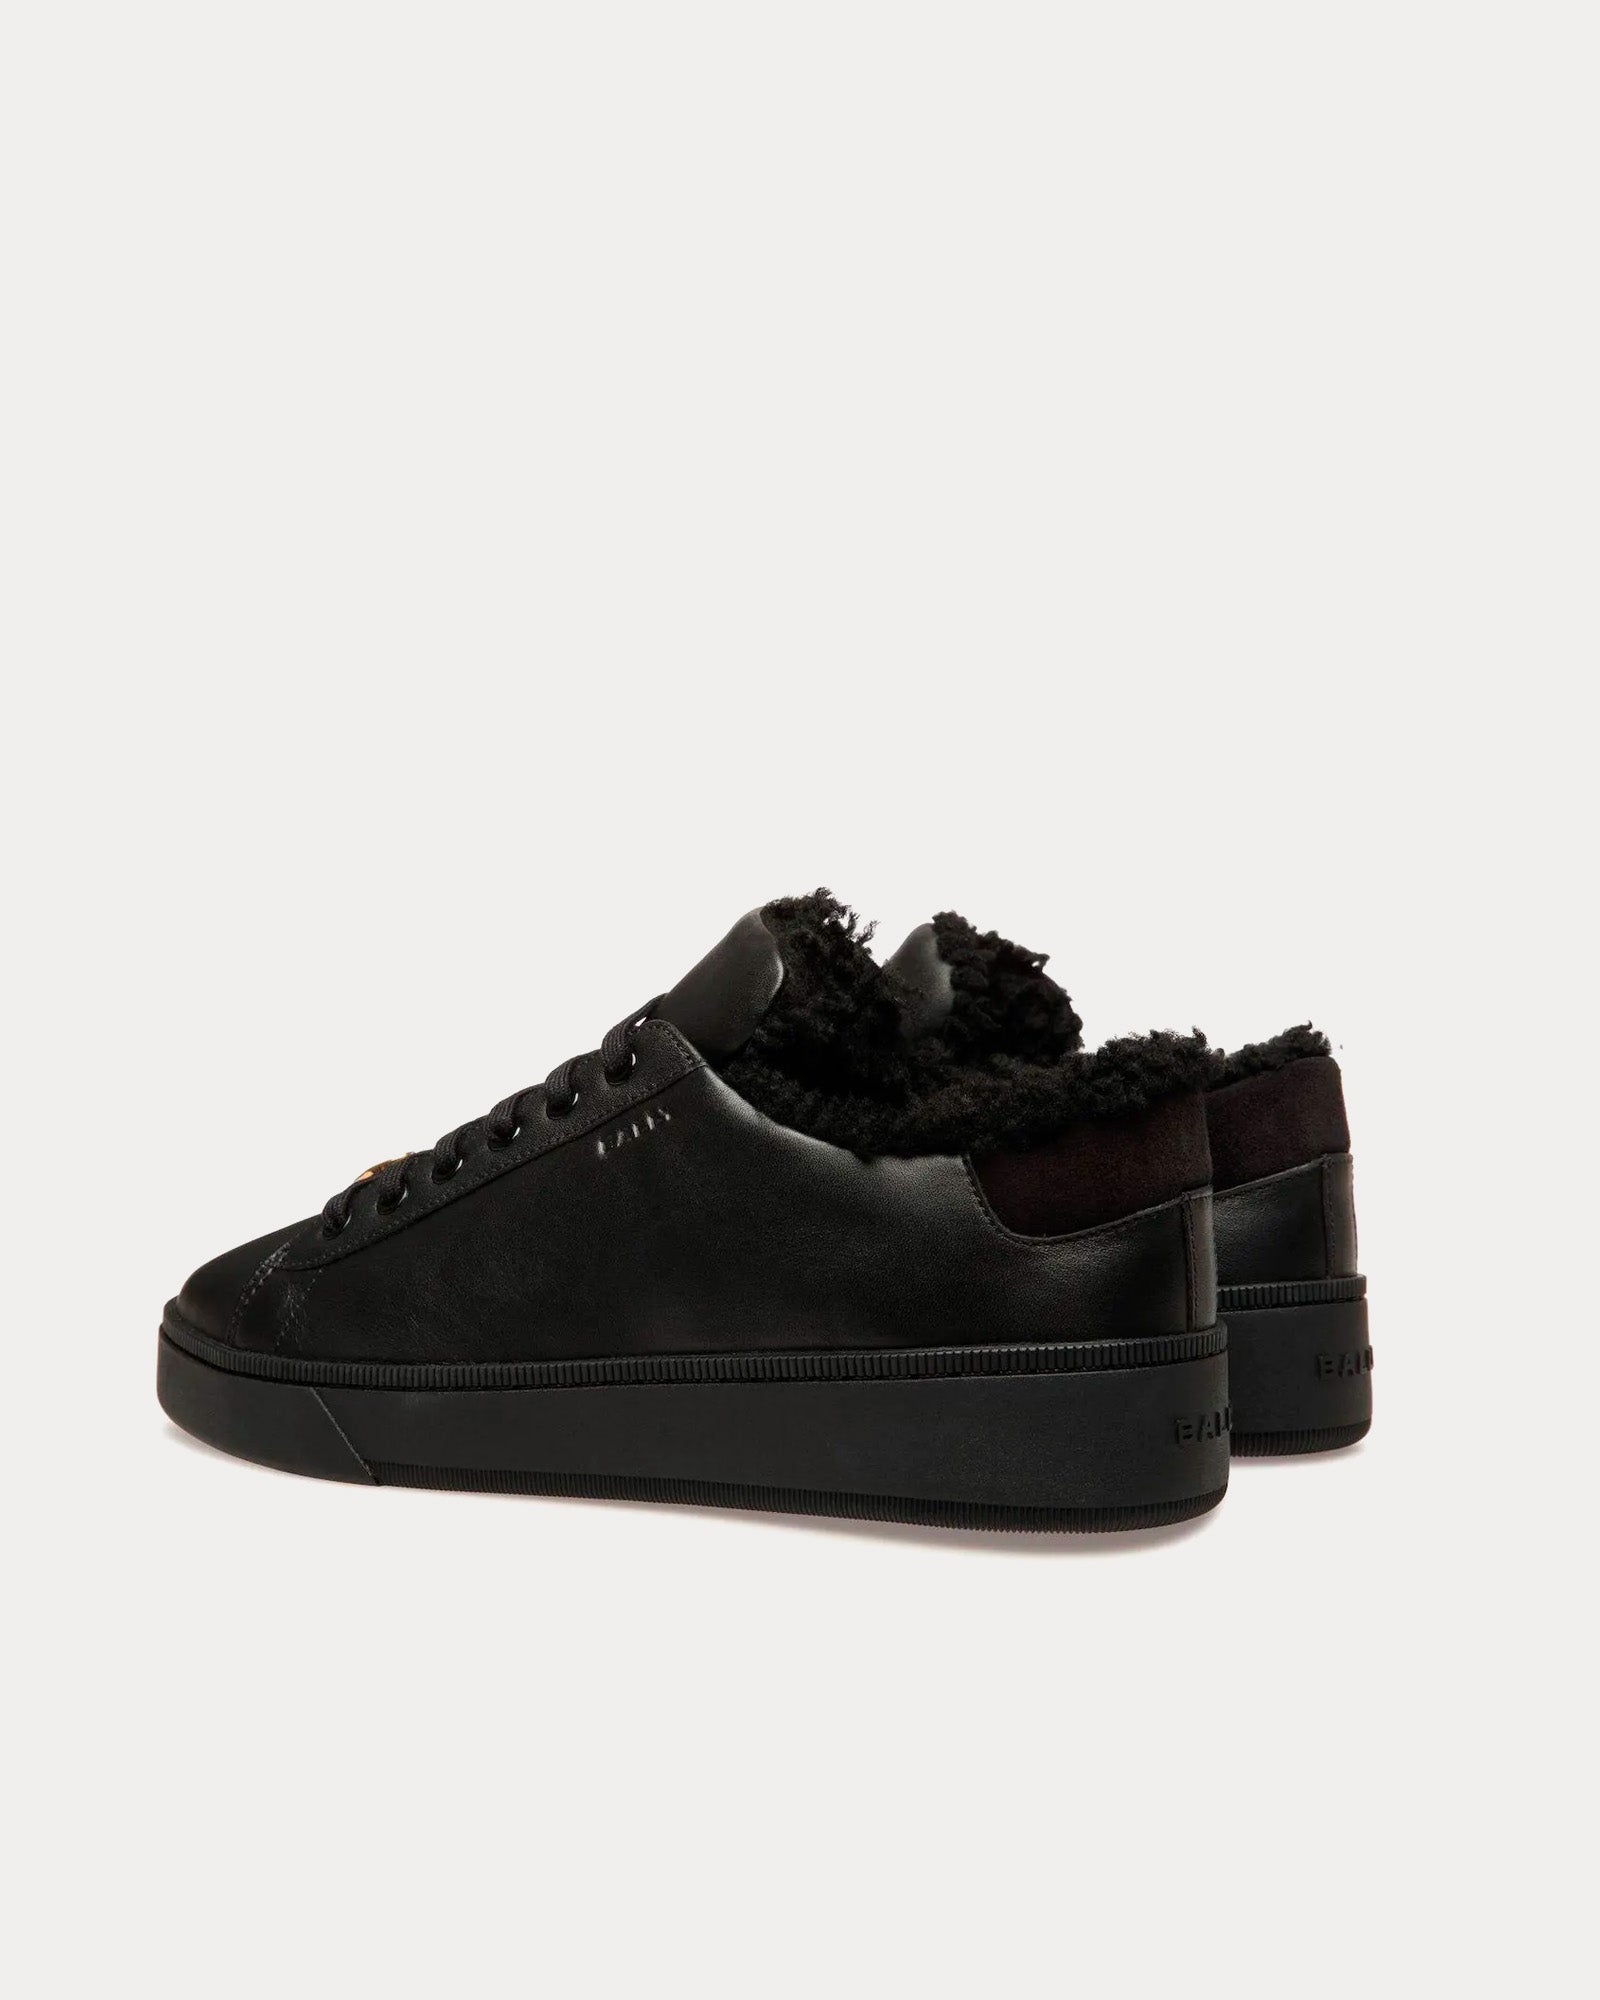 Bally - Raise Leather & Shearling Black Low Top Sneakers